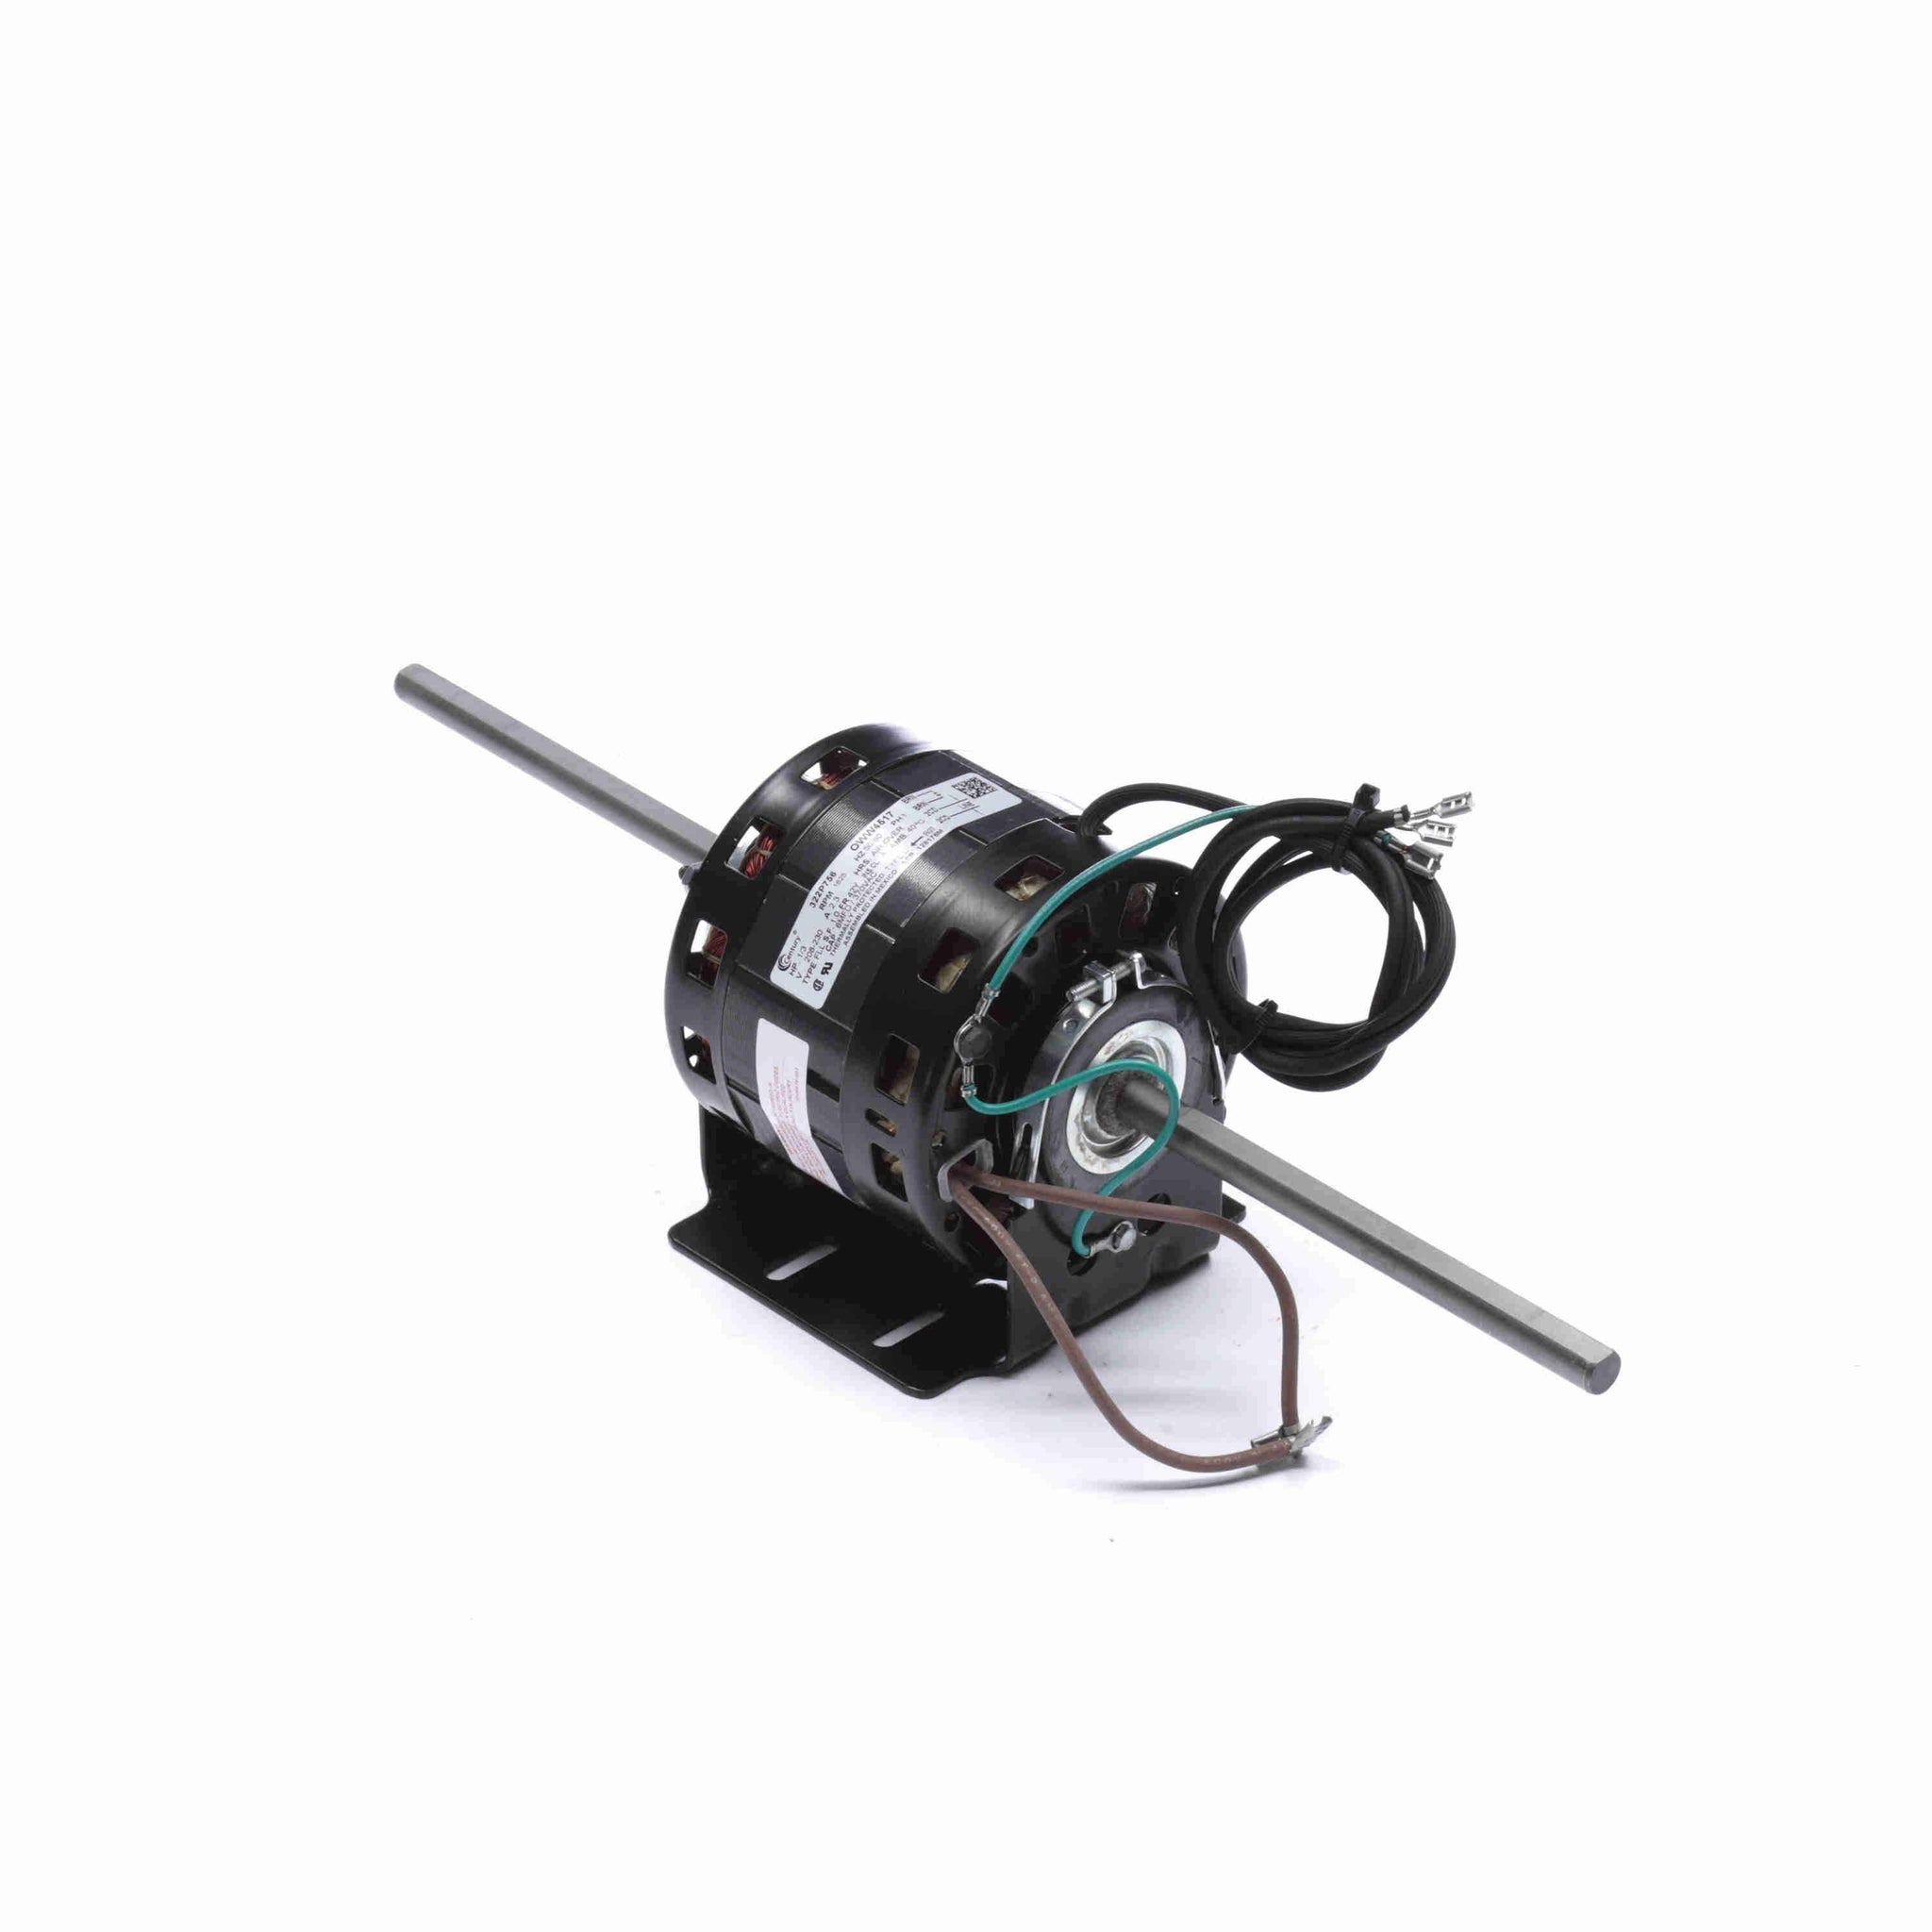 OWW4517 - 1/3 HP OEM Replacement Motor, 1625 RPM, 208-230 Volts, 42 Frame, OAO - Hardware & Moreee